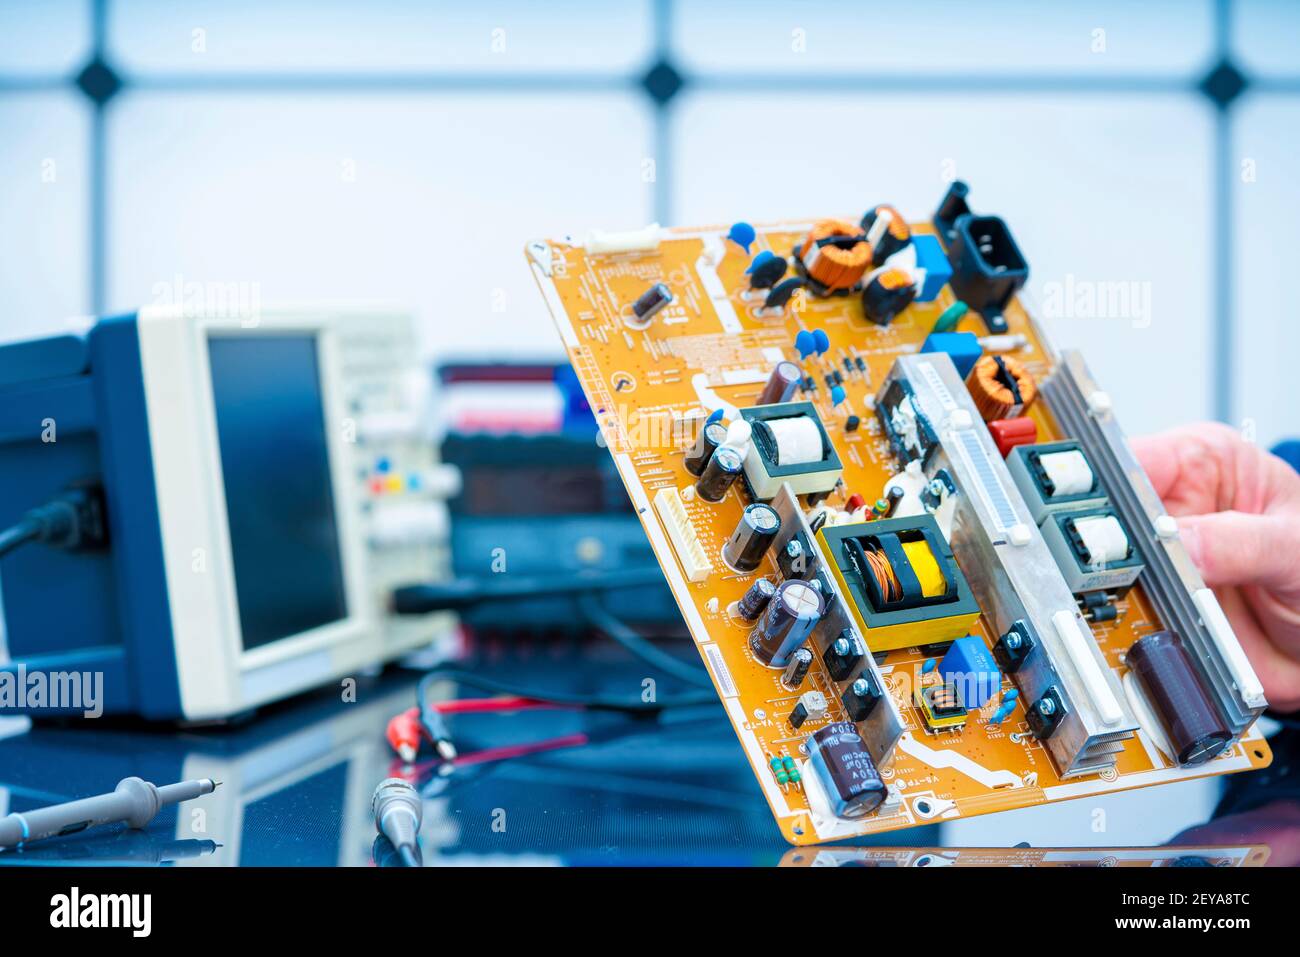 Circuit board witch microcontroller Stock Photo